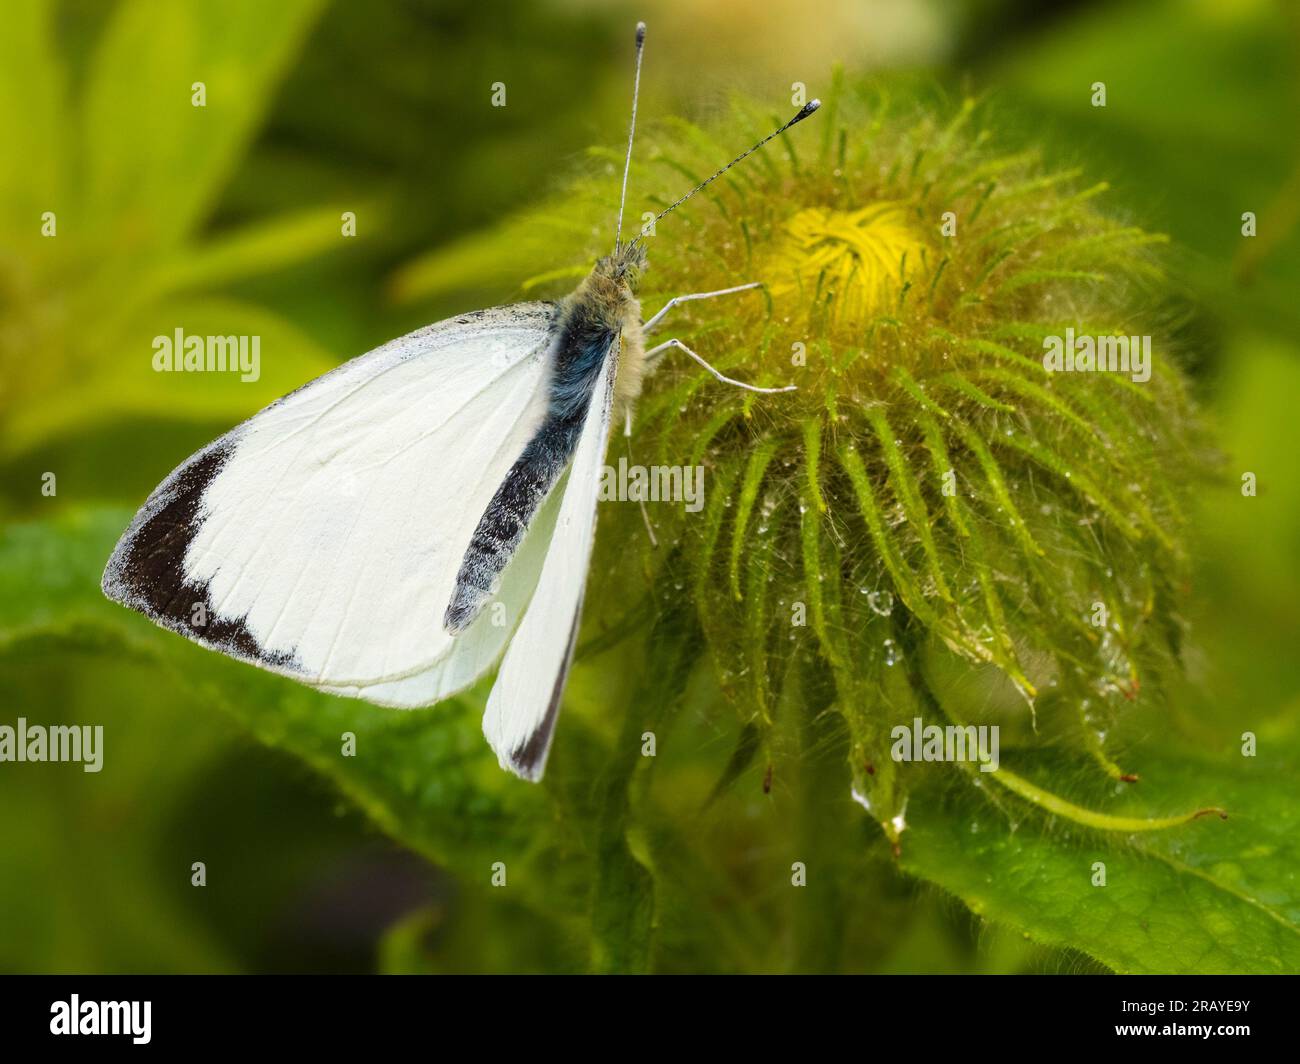 Male cabbage white butterfly, Pieris brassicae, resting on a bud of Inula hookeri in a UK garden Stock Photo